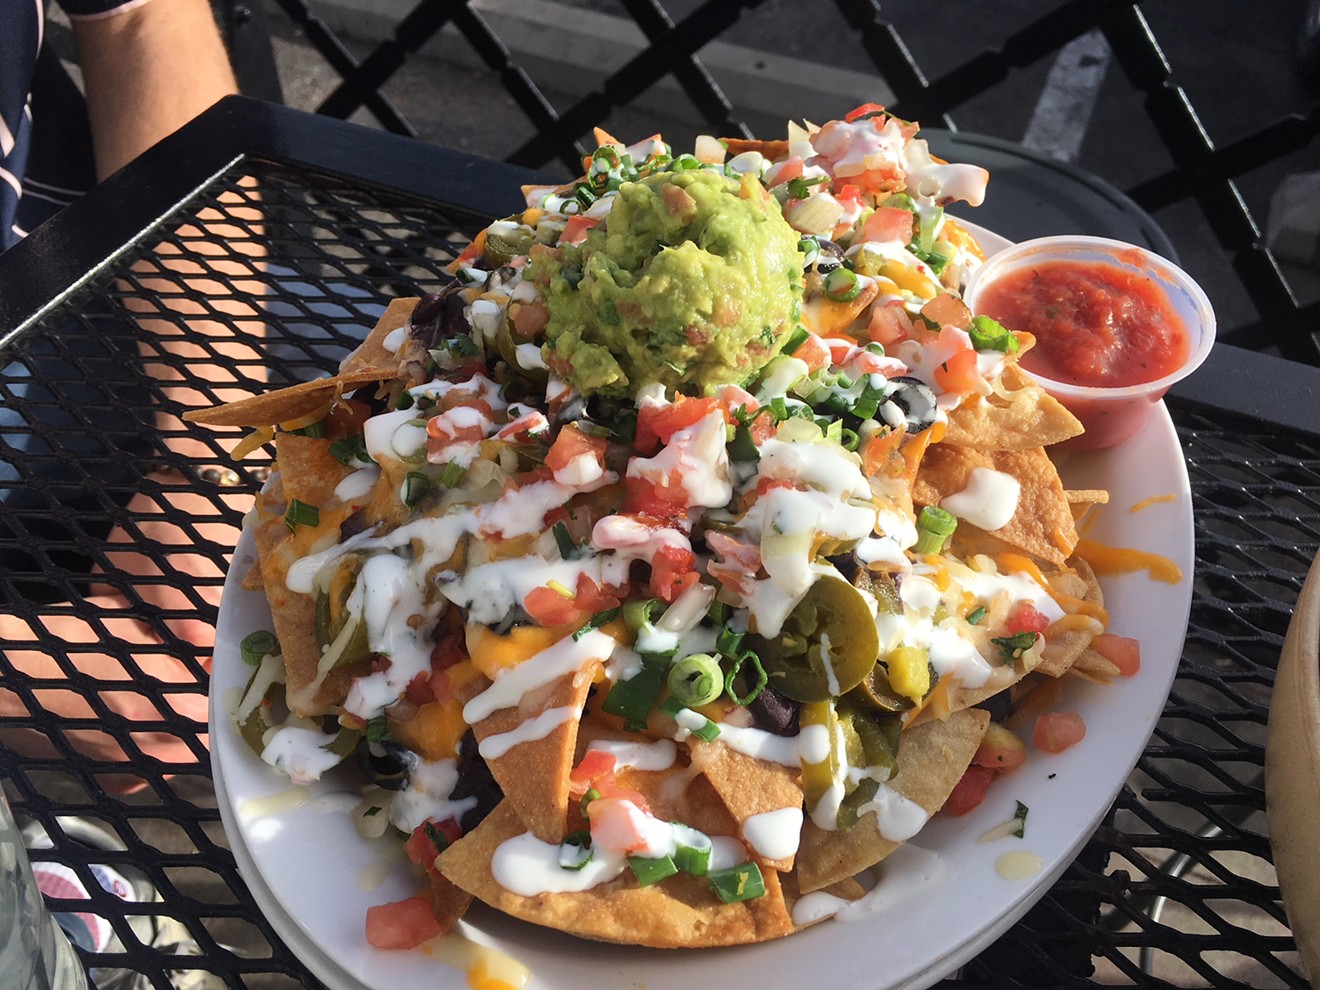 Billy's Inn's nachos are a touchpoint that keeps regulars coming back.